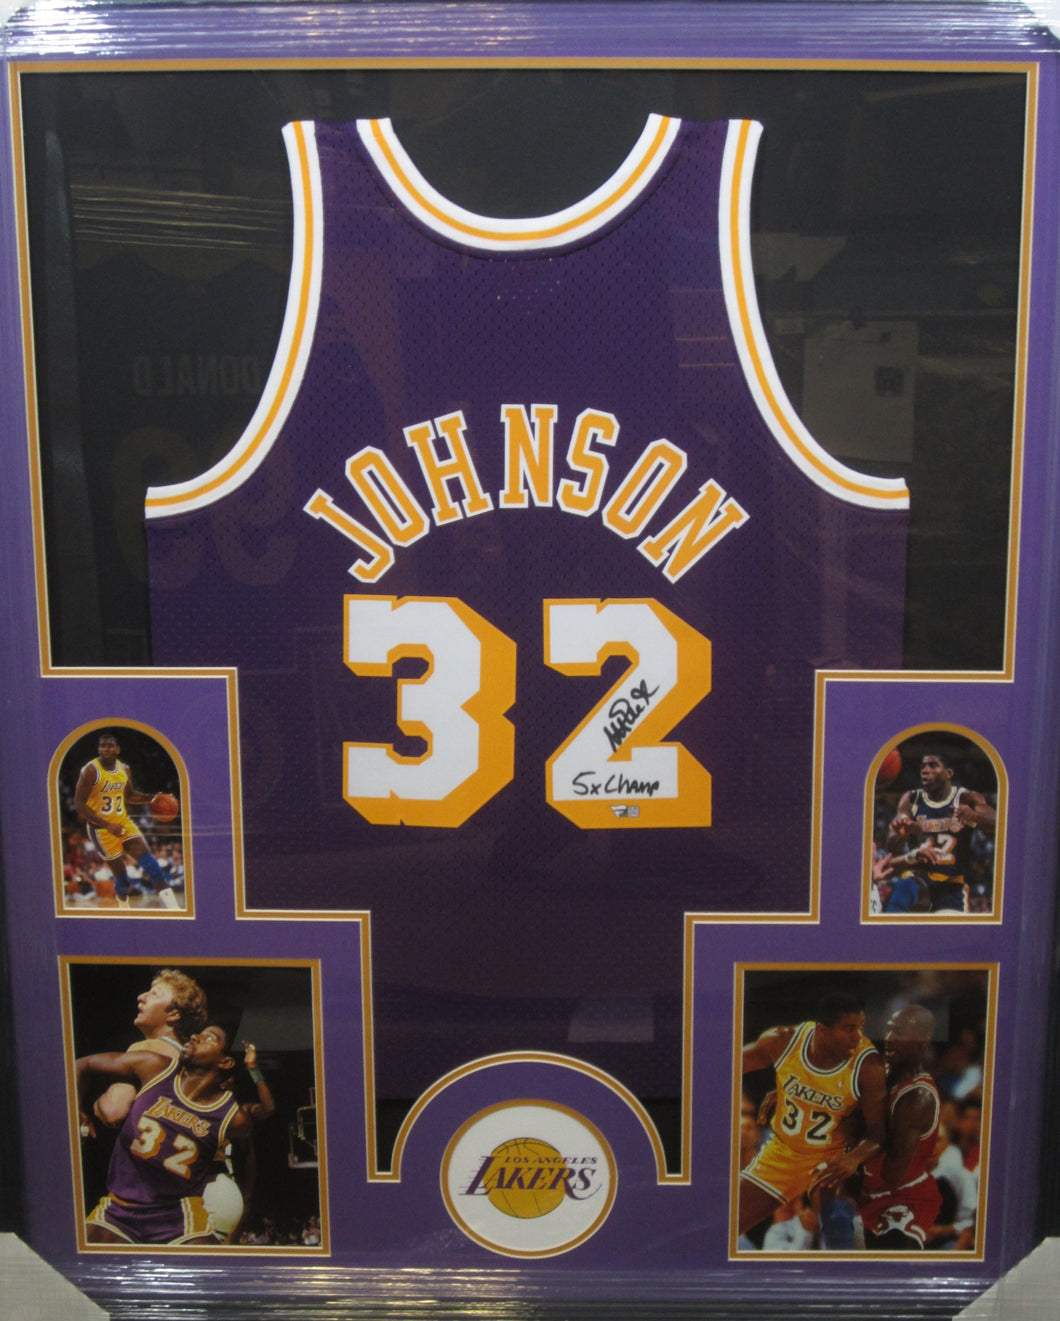 Los Angeles Lakers Magic Johnson Signed Jersey with 5x Champ Inscription Framed & Matted with FANATICS Authentic COA